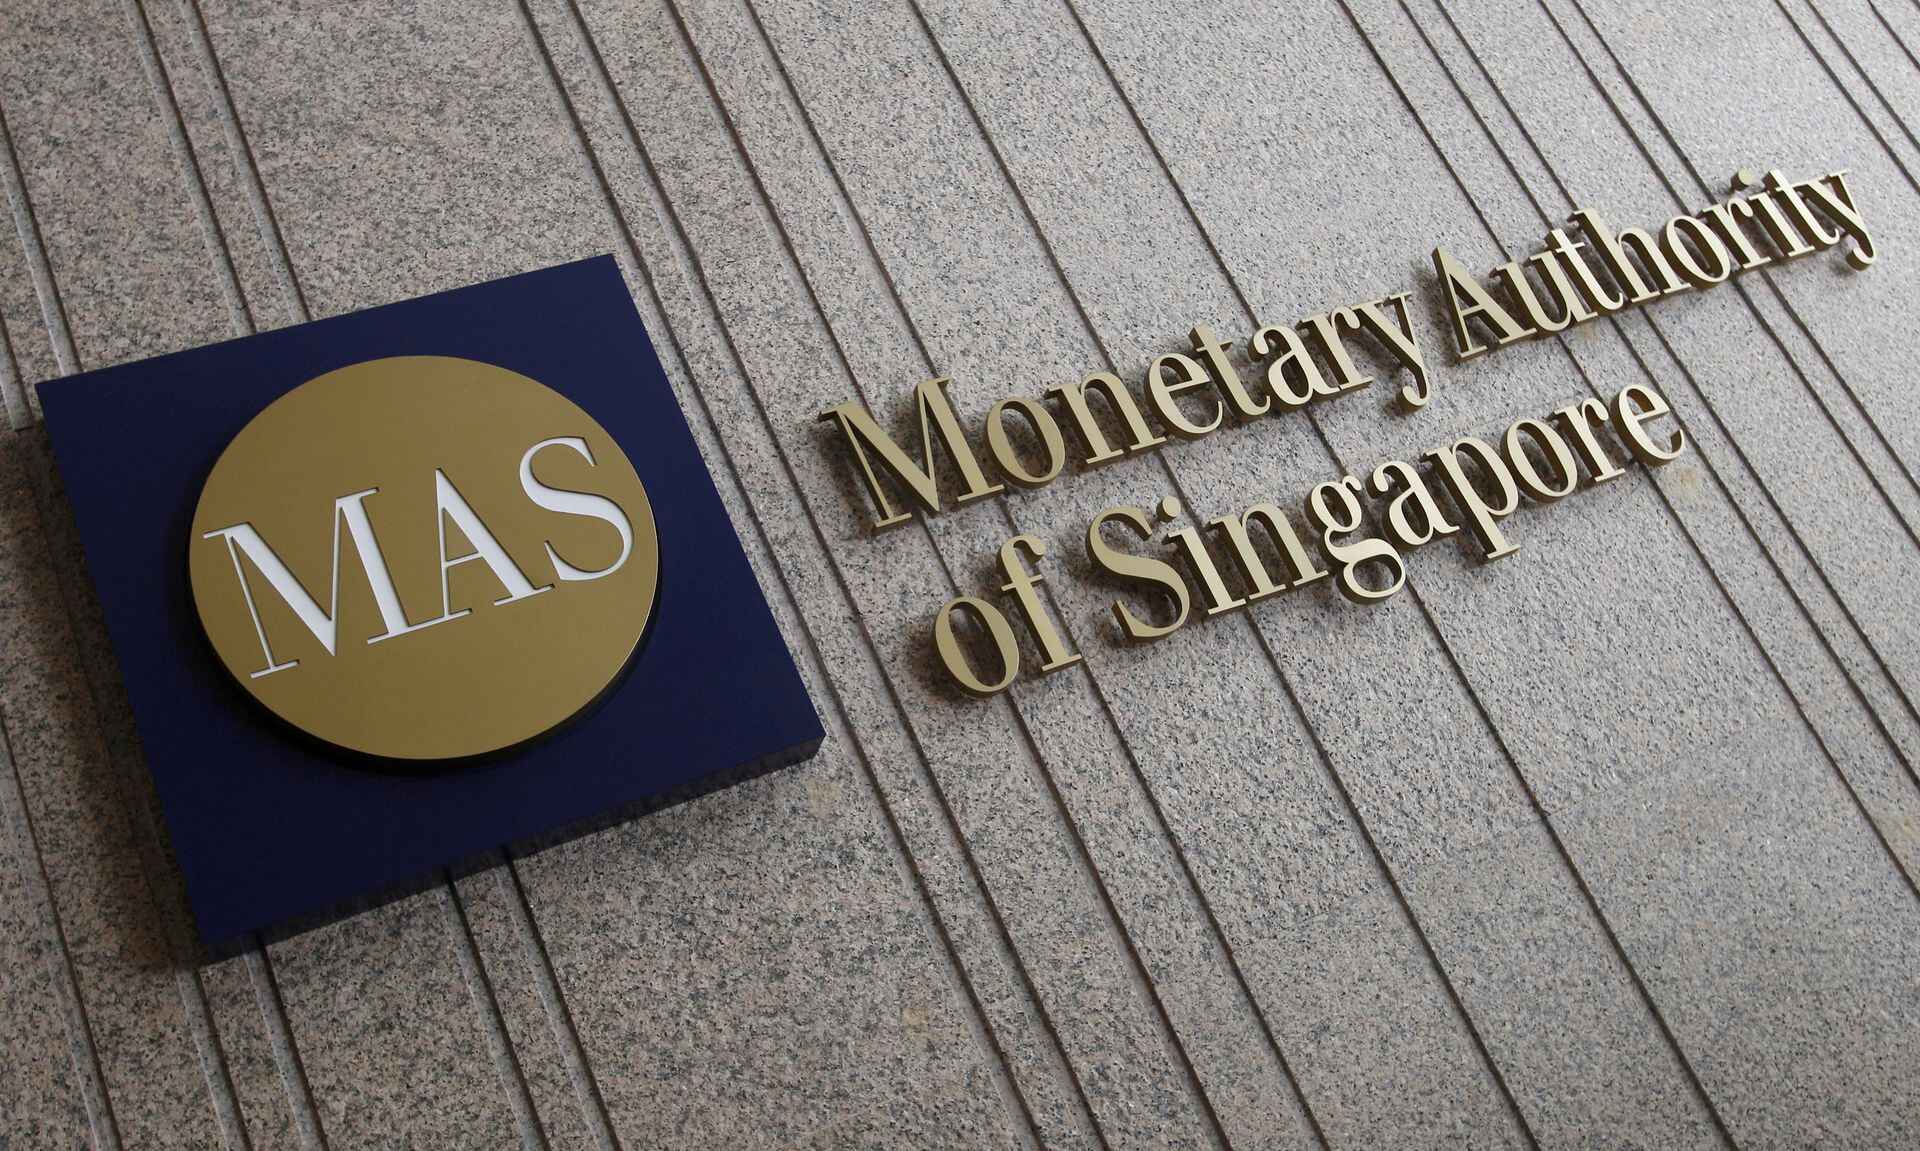 Singapore's central bank under scrutiny over alleged favorable treatment of Sam Bankman-Fried's FTX exchange